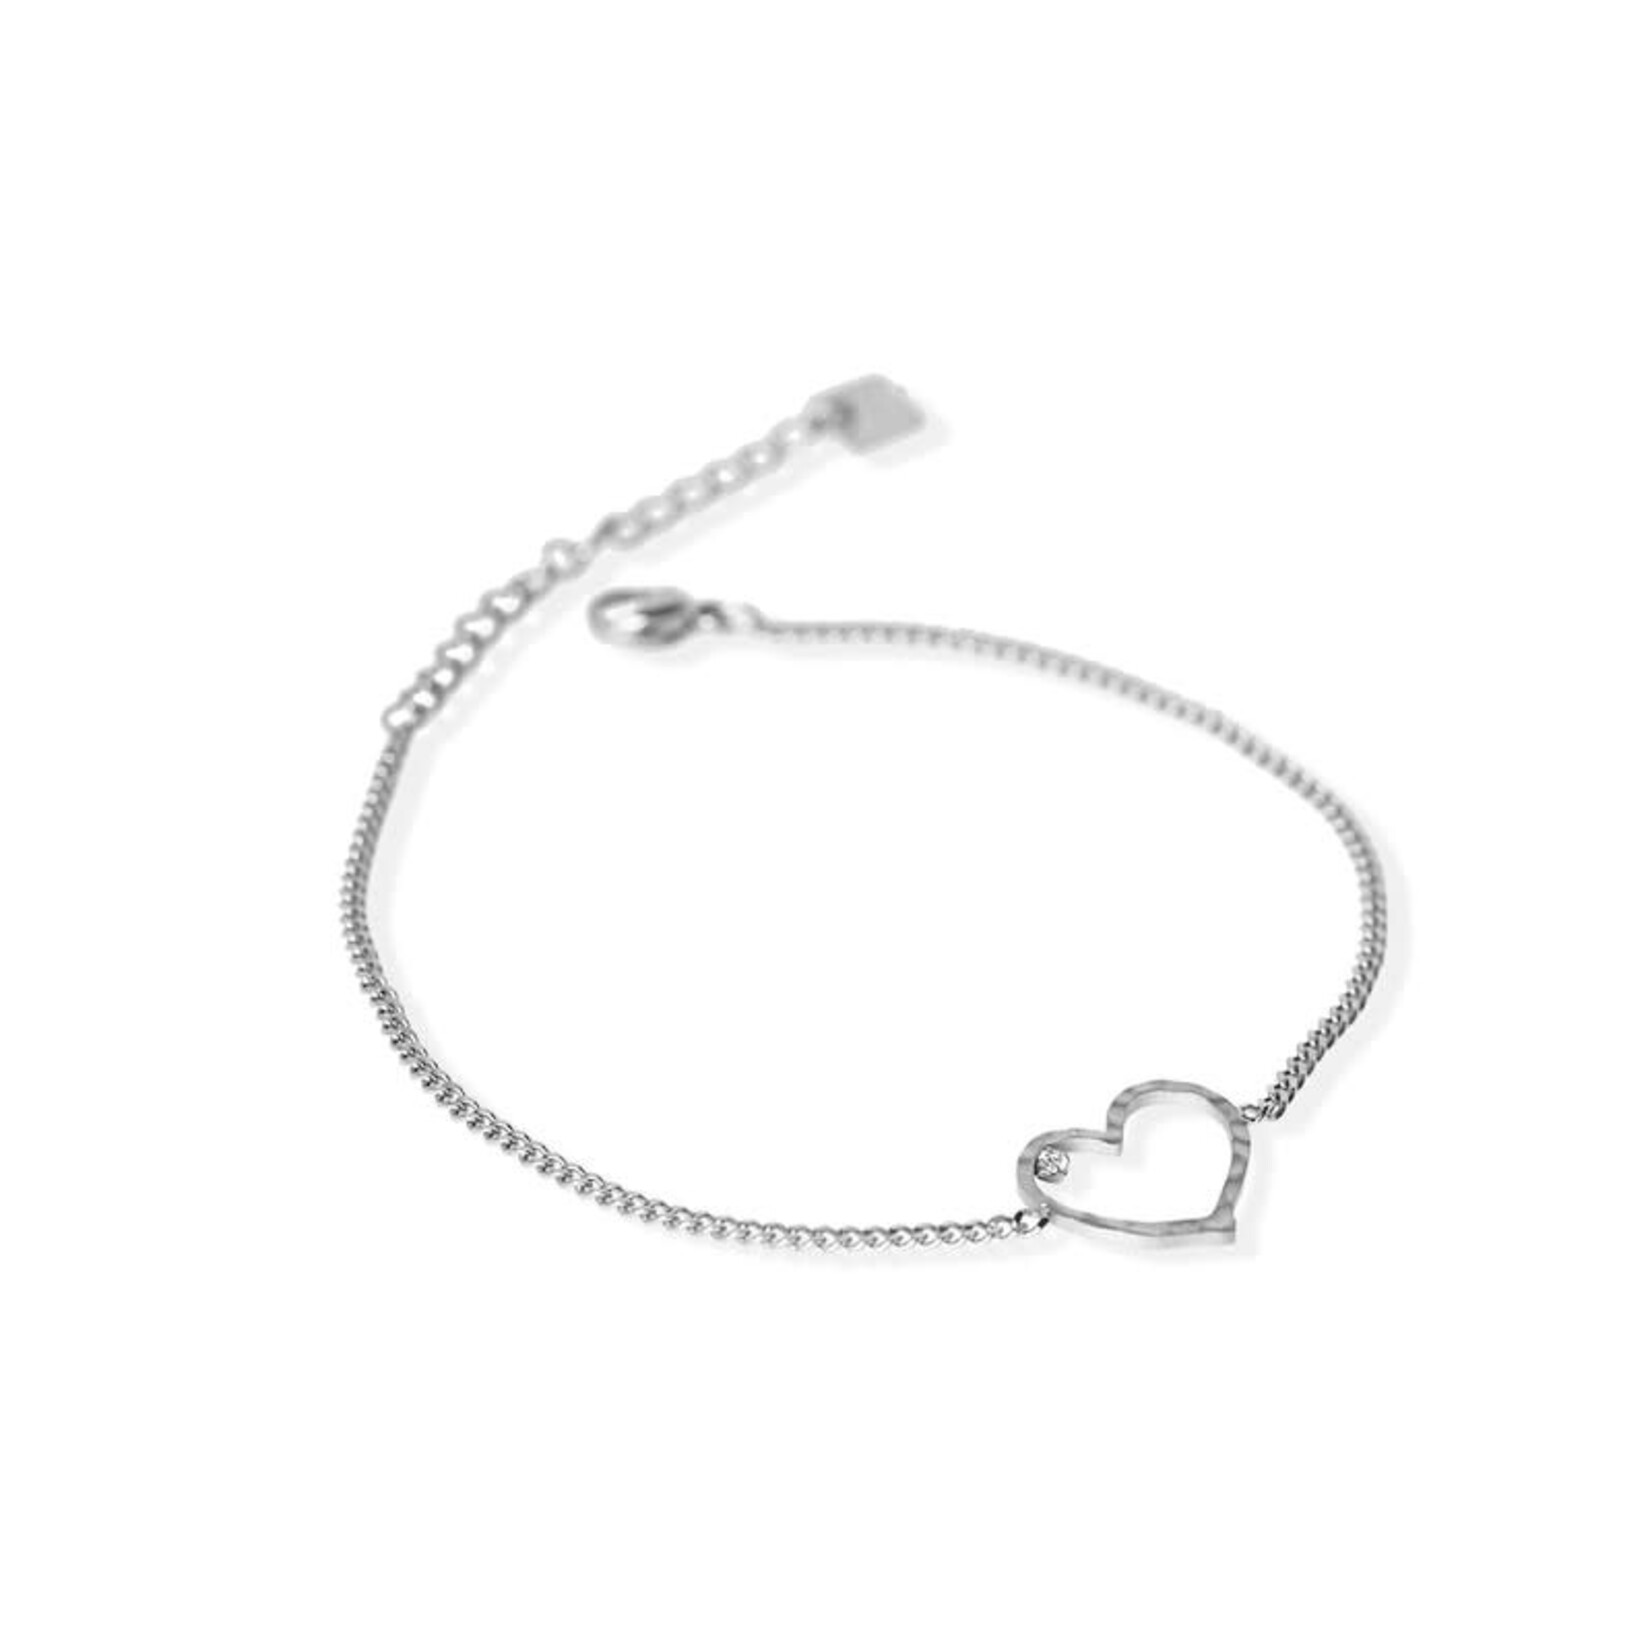 FAB Accessories Hammered Heart Bracelet -